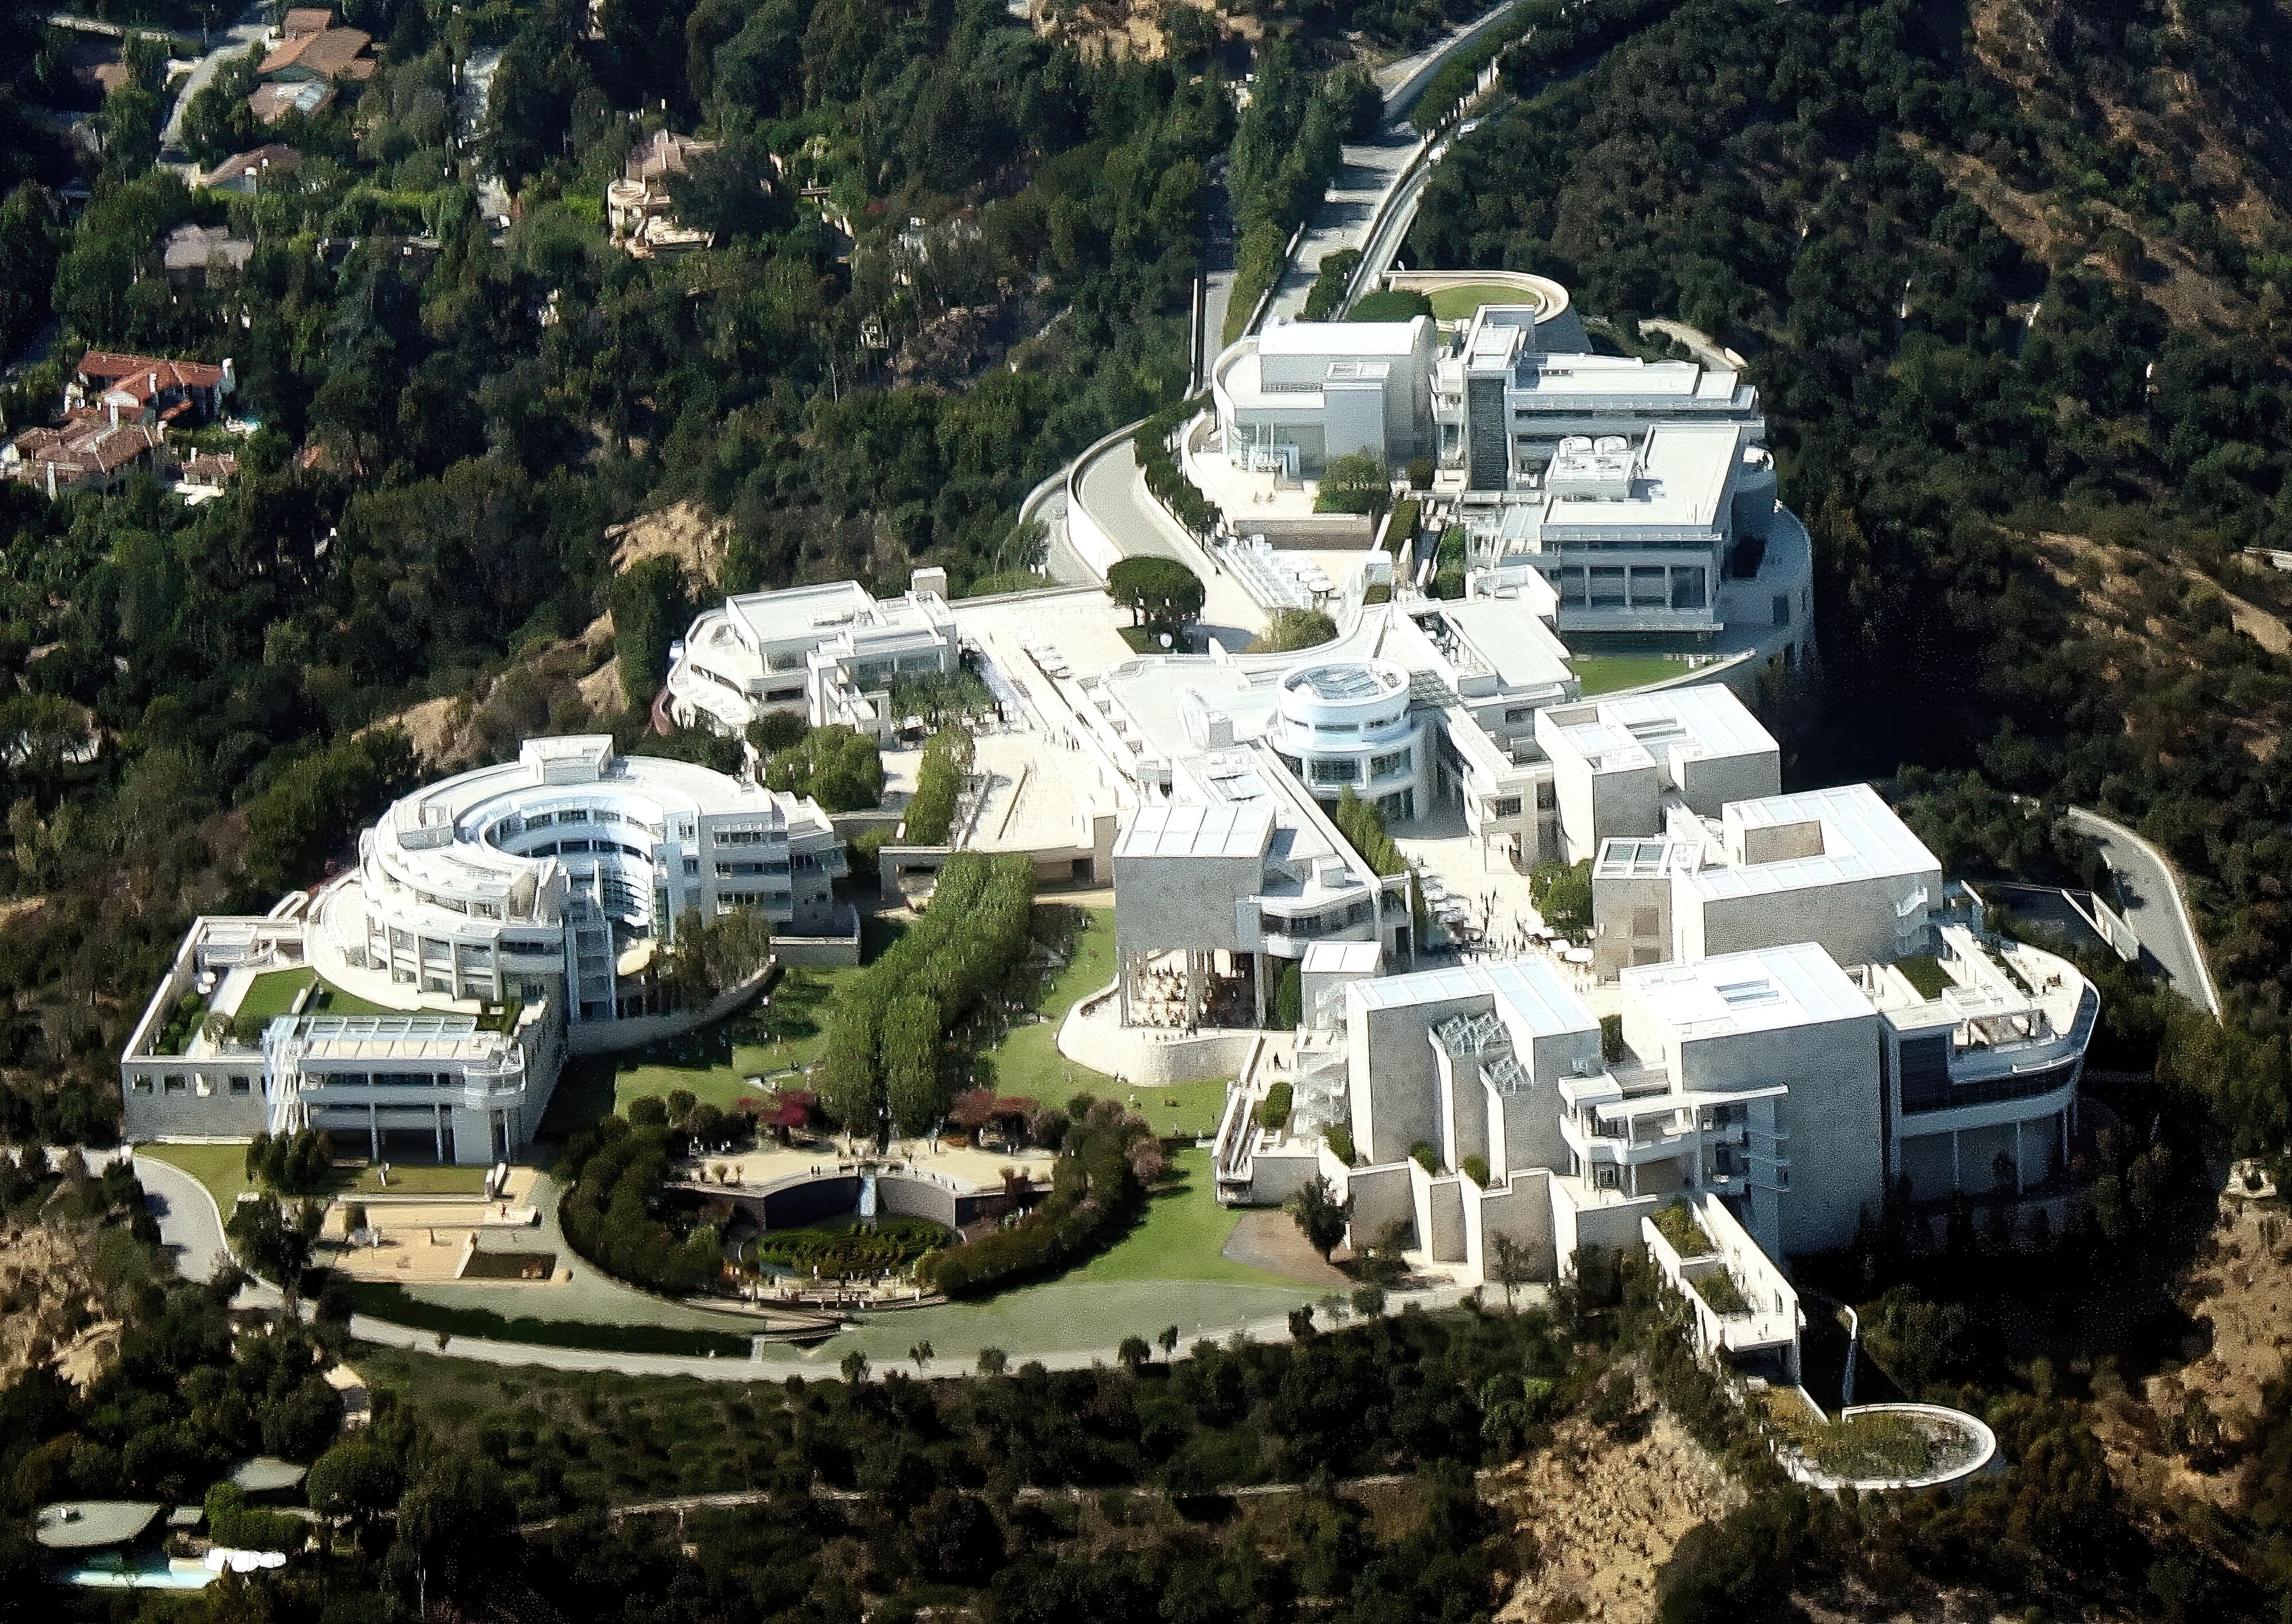 Aerial view of the Getty Center museum